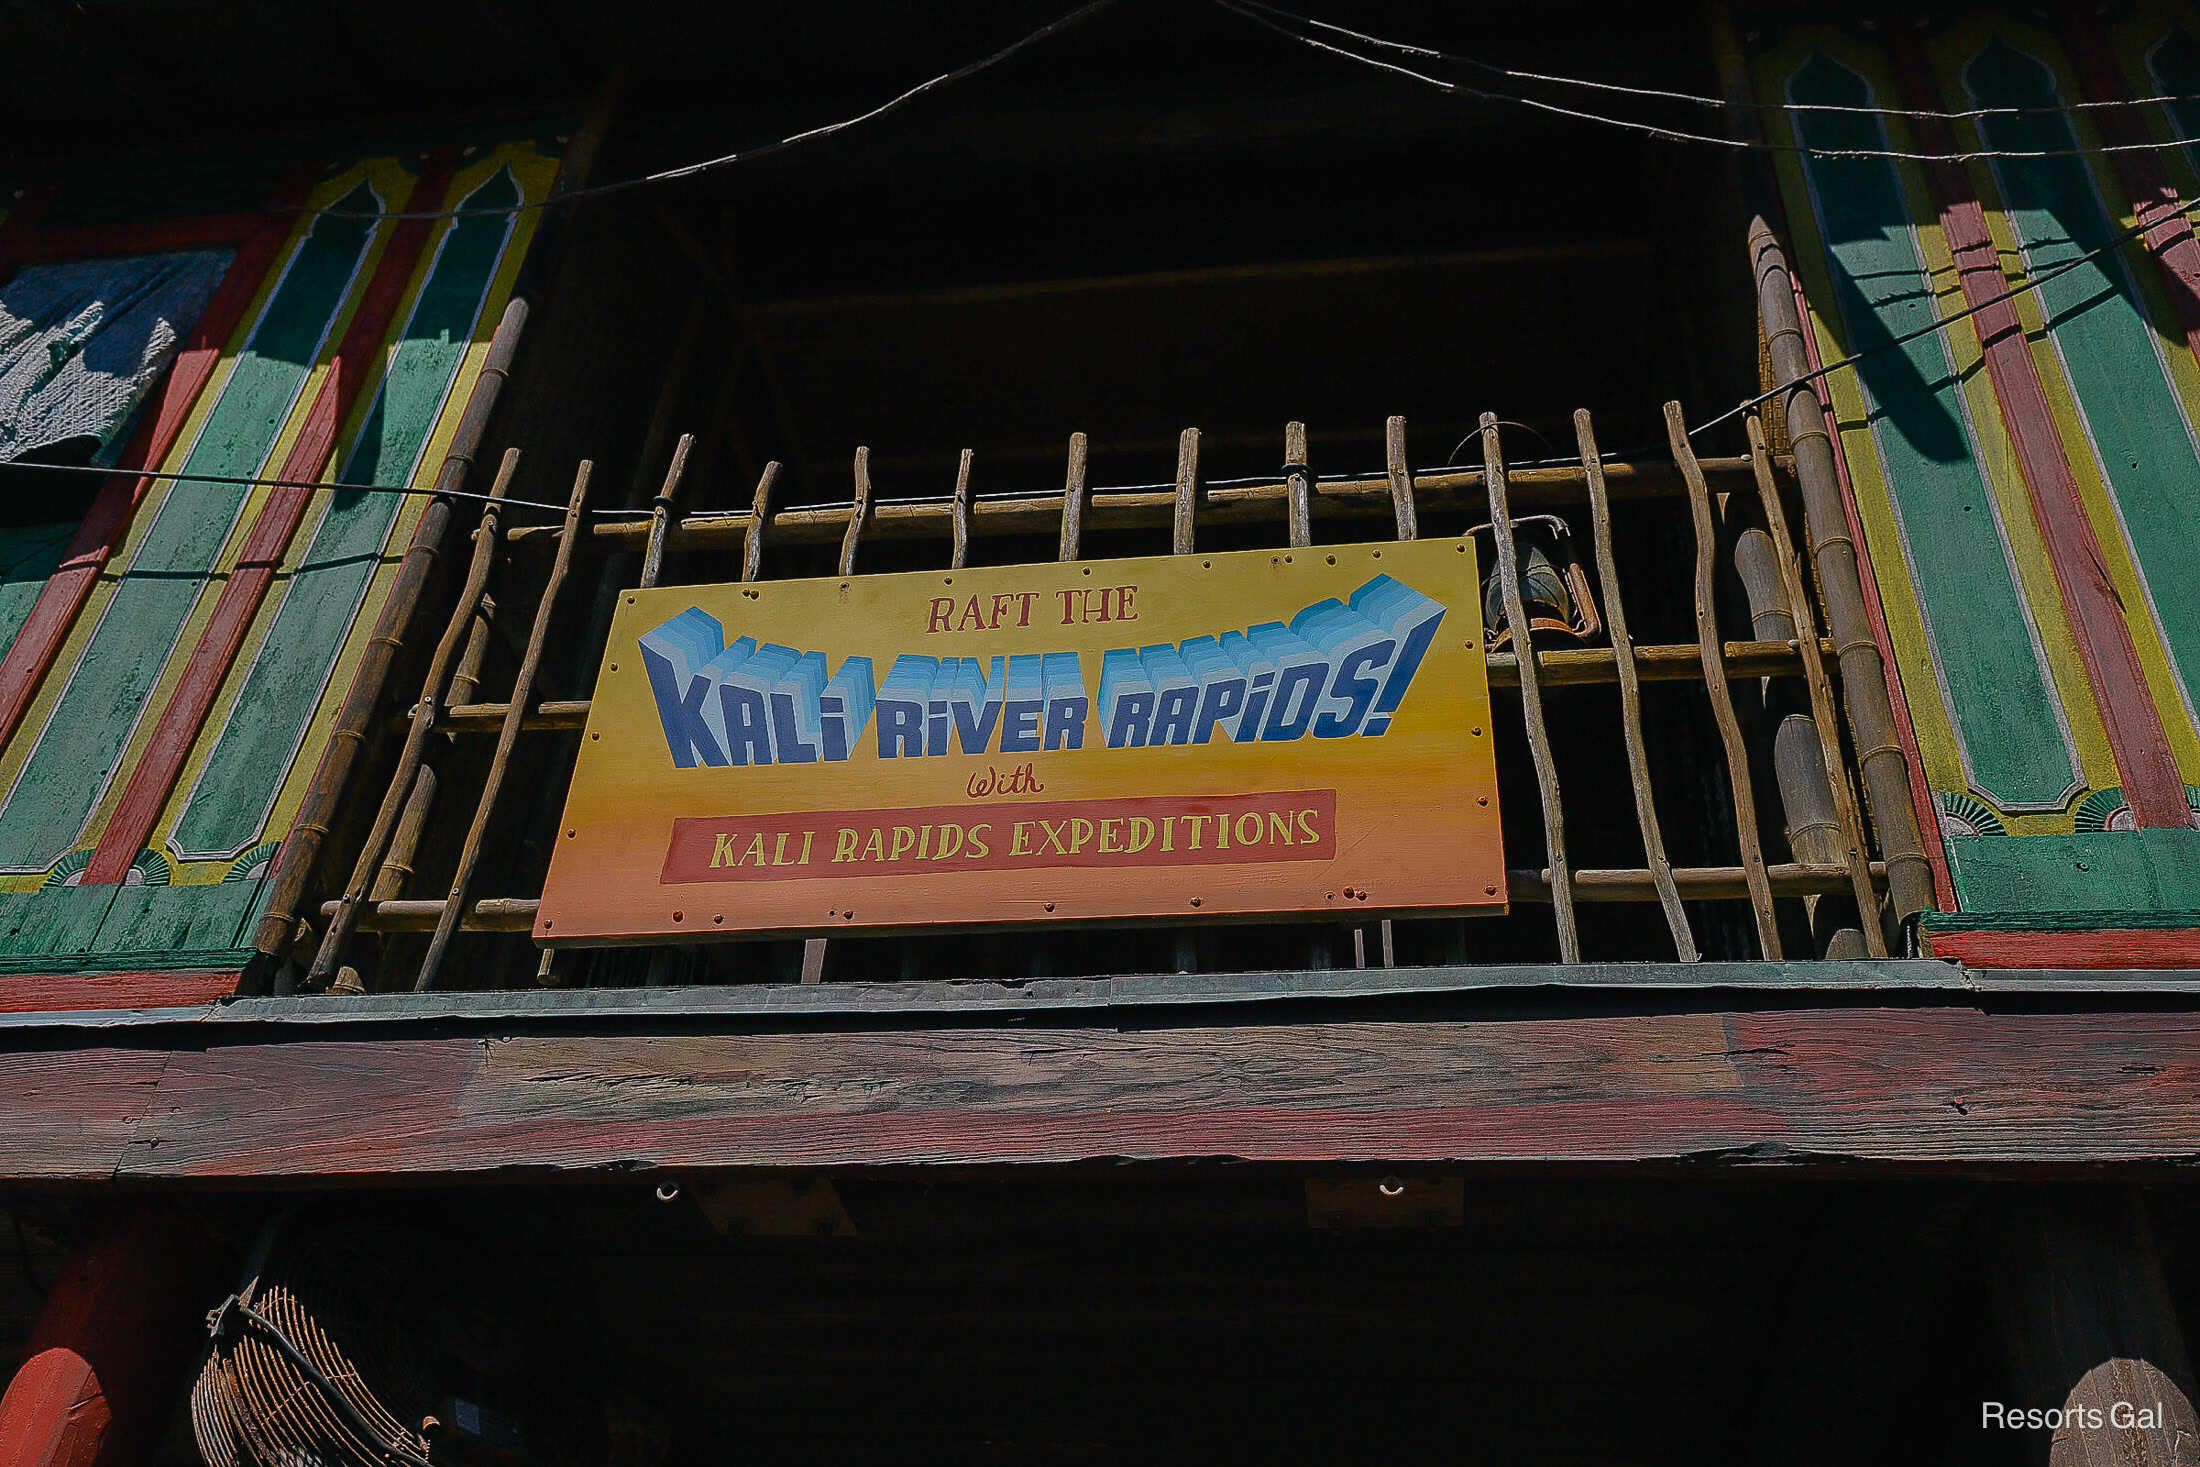 the attraction sign reads "Raft the Kali River Rapids with Kali Rapids Expeditions"